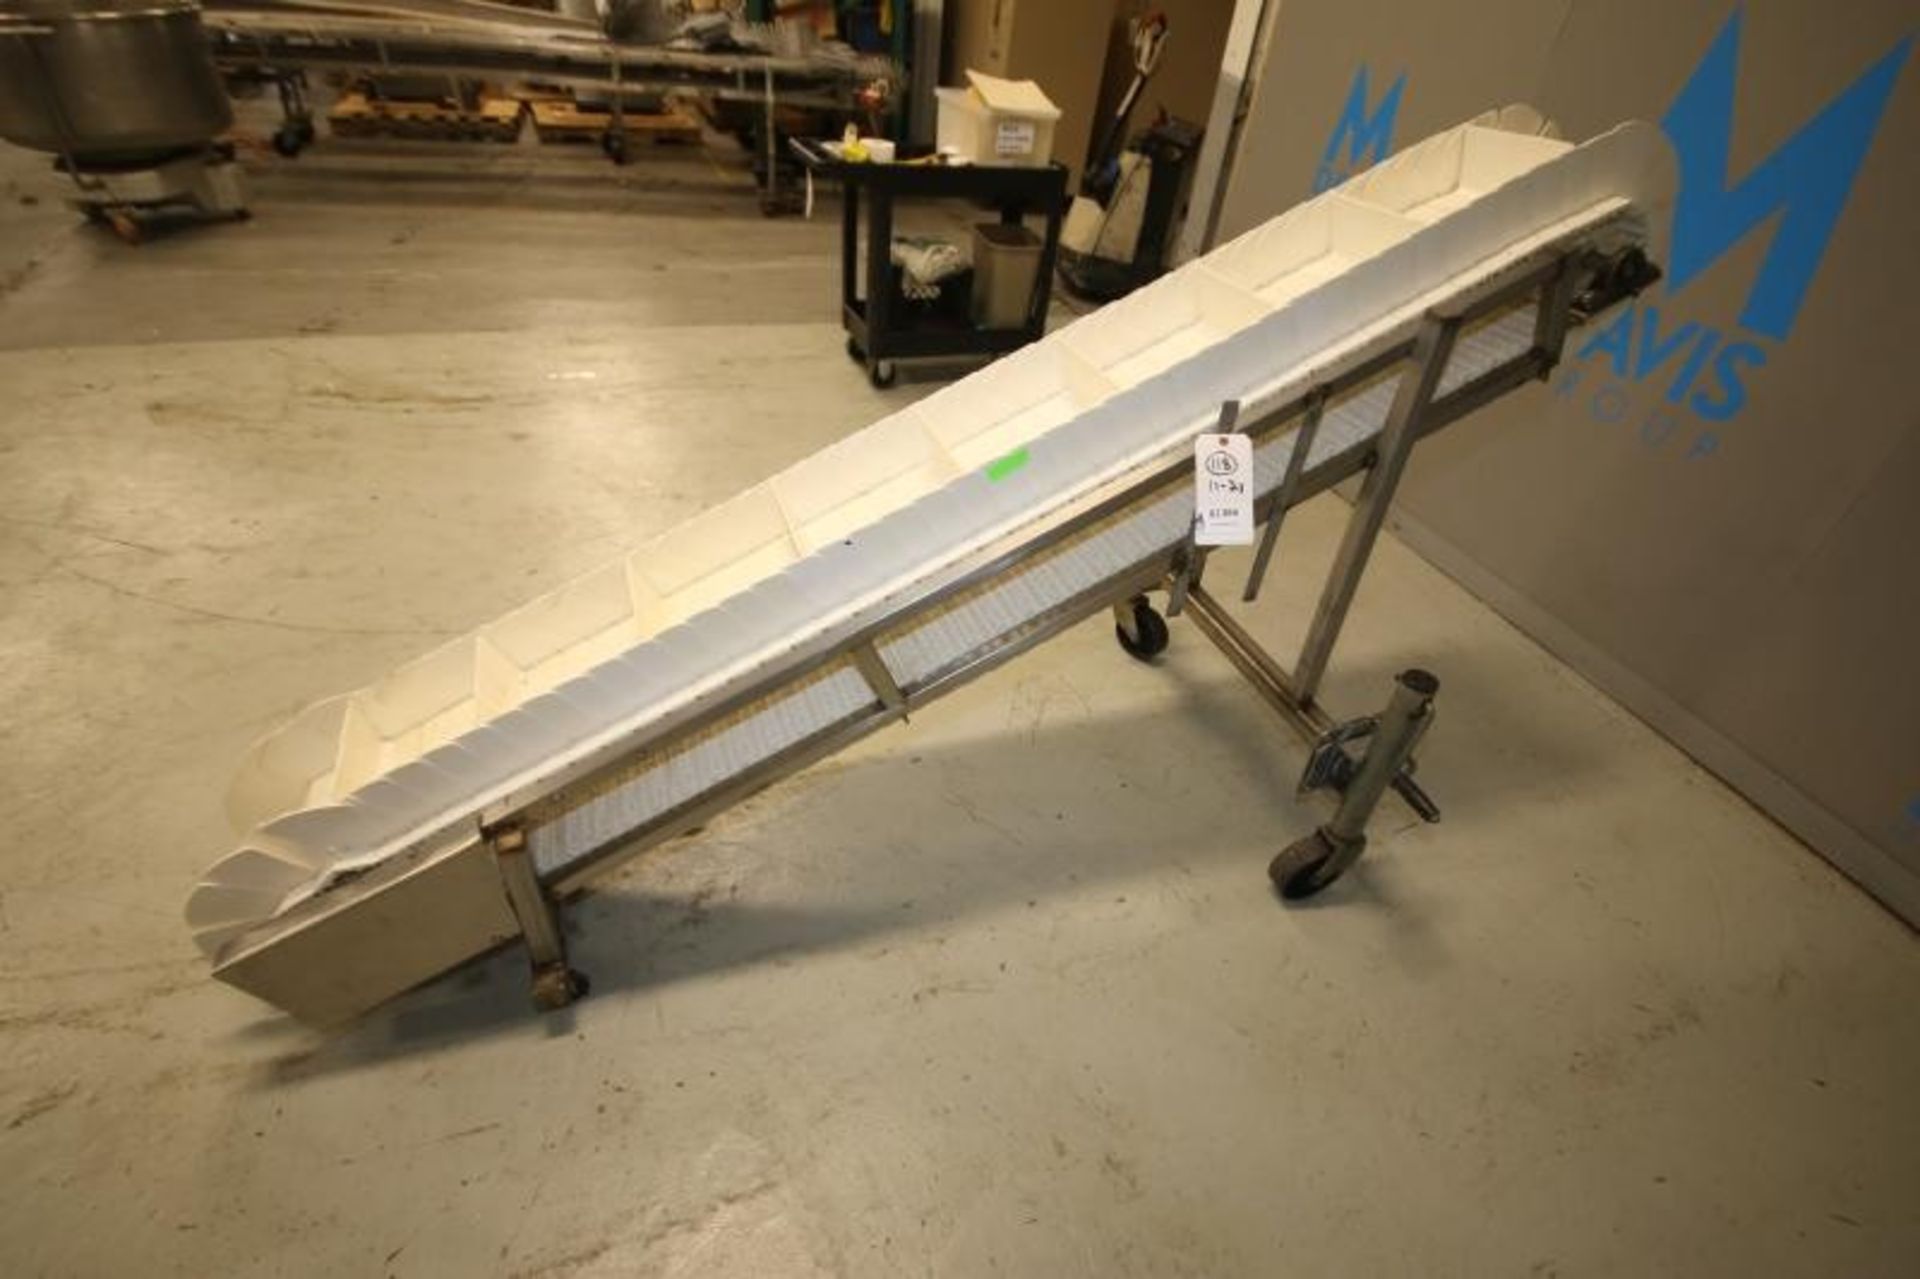 8' L x 9" W x 49" H Inclined S/S Conveyor, with 10" Flights, Mounted on Wheels, (Note: Missing Drive - Image 3 of 6